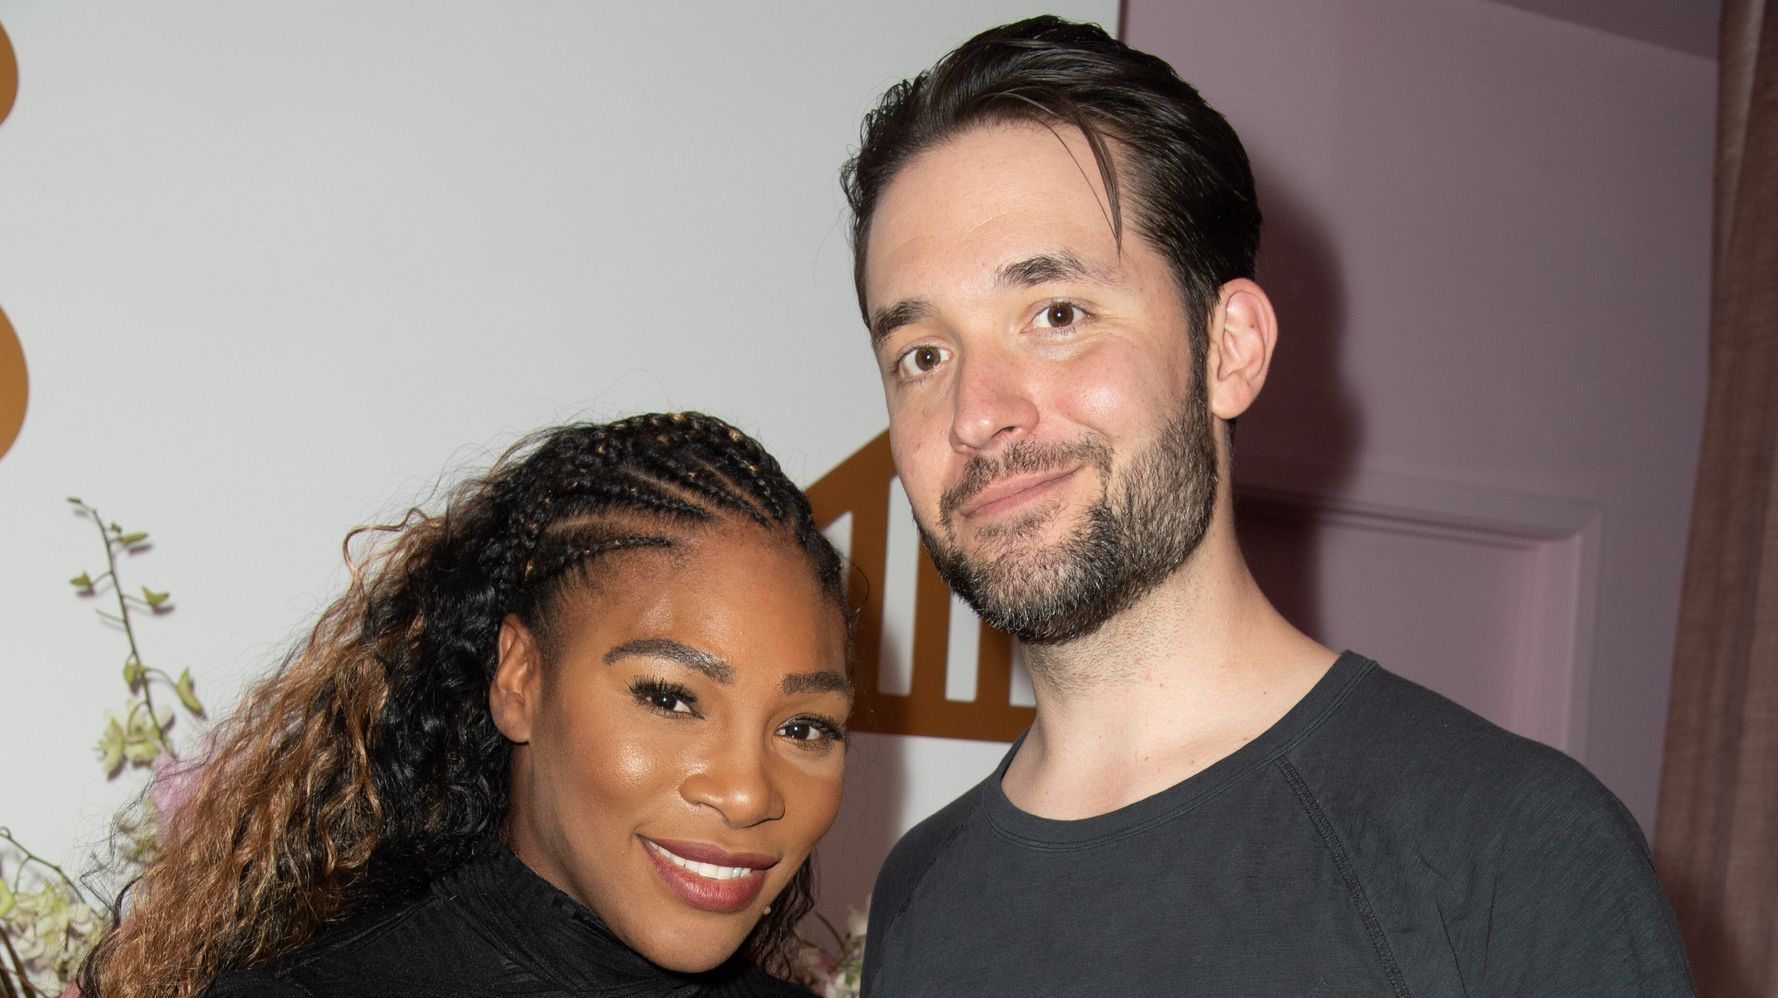 Alexis Ohanian Gushes He's 'Grateful For Every Minute' With Serena Williams